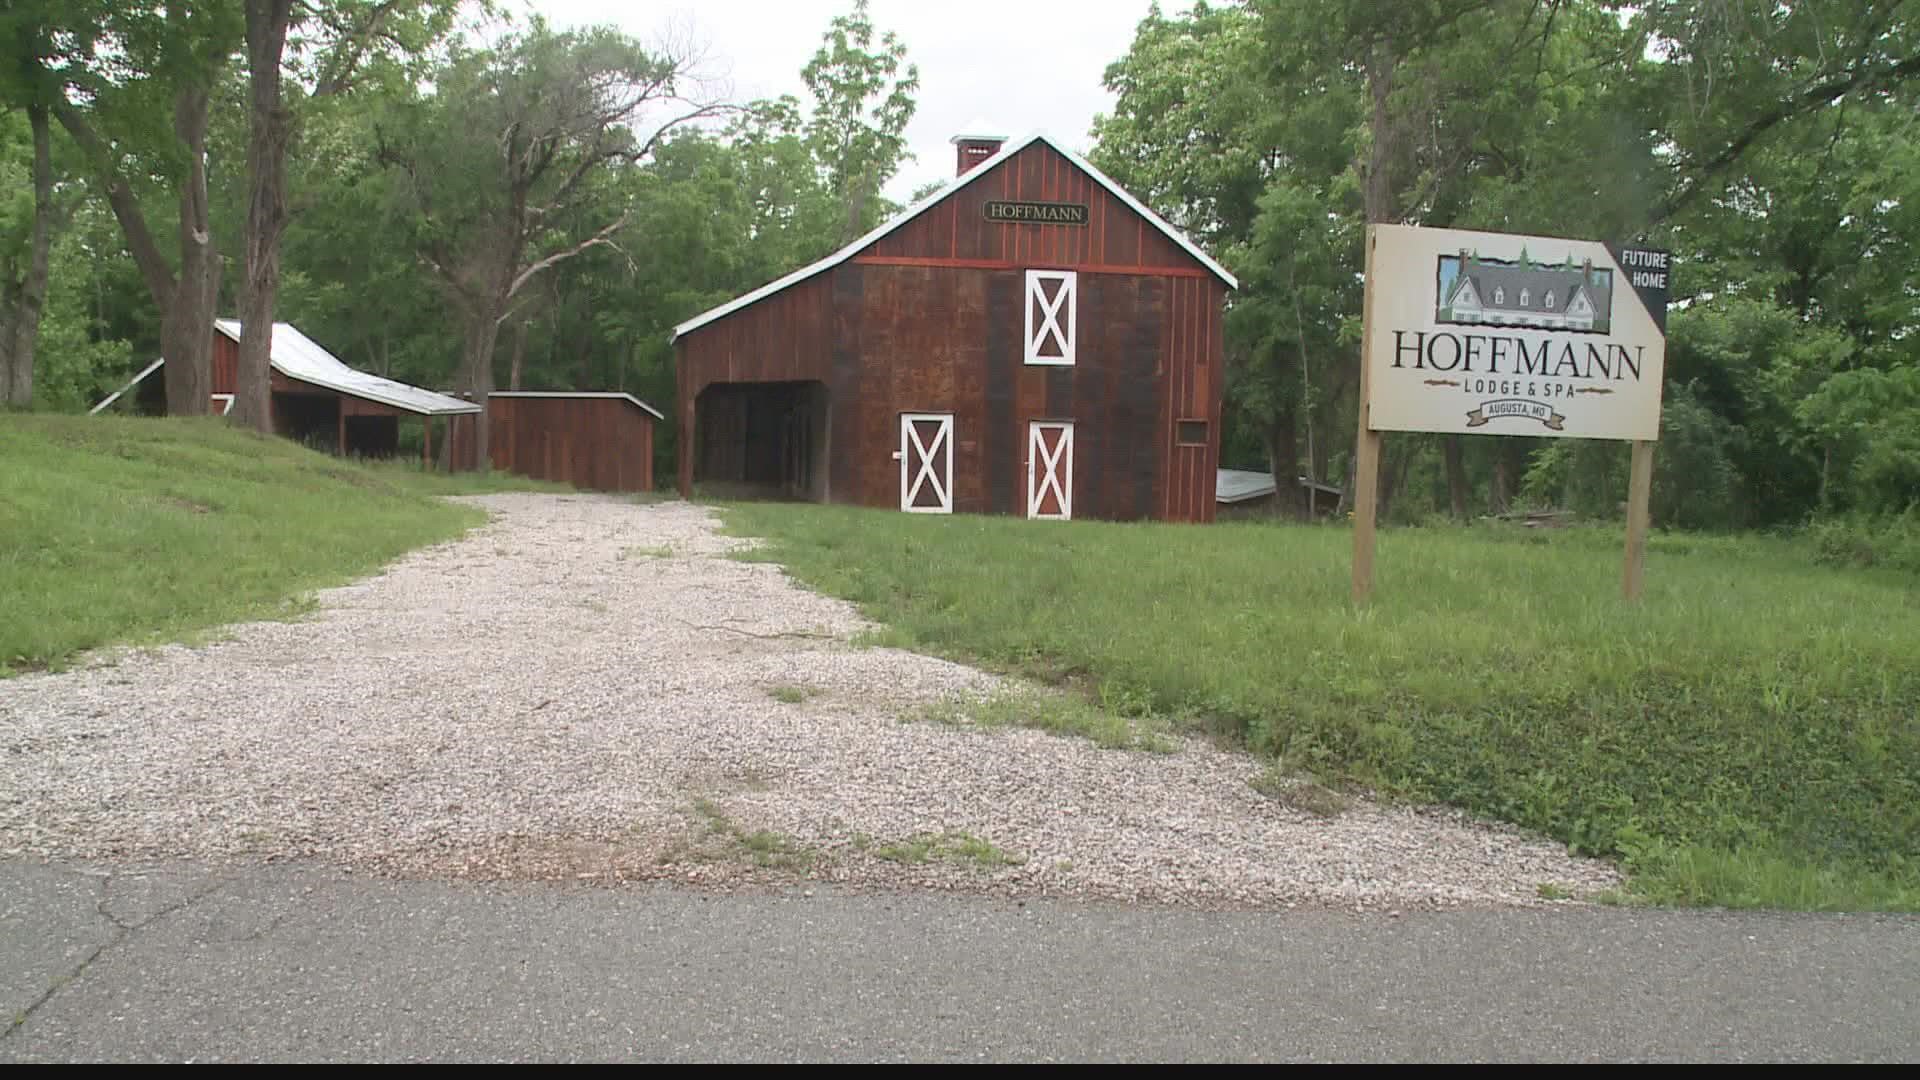 Progress is being made in Augusta as the Hoffmann family invests millions into the community. Some residents have mixed feelings.